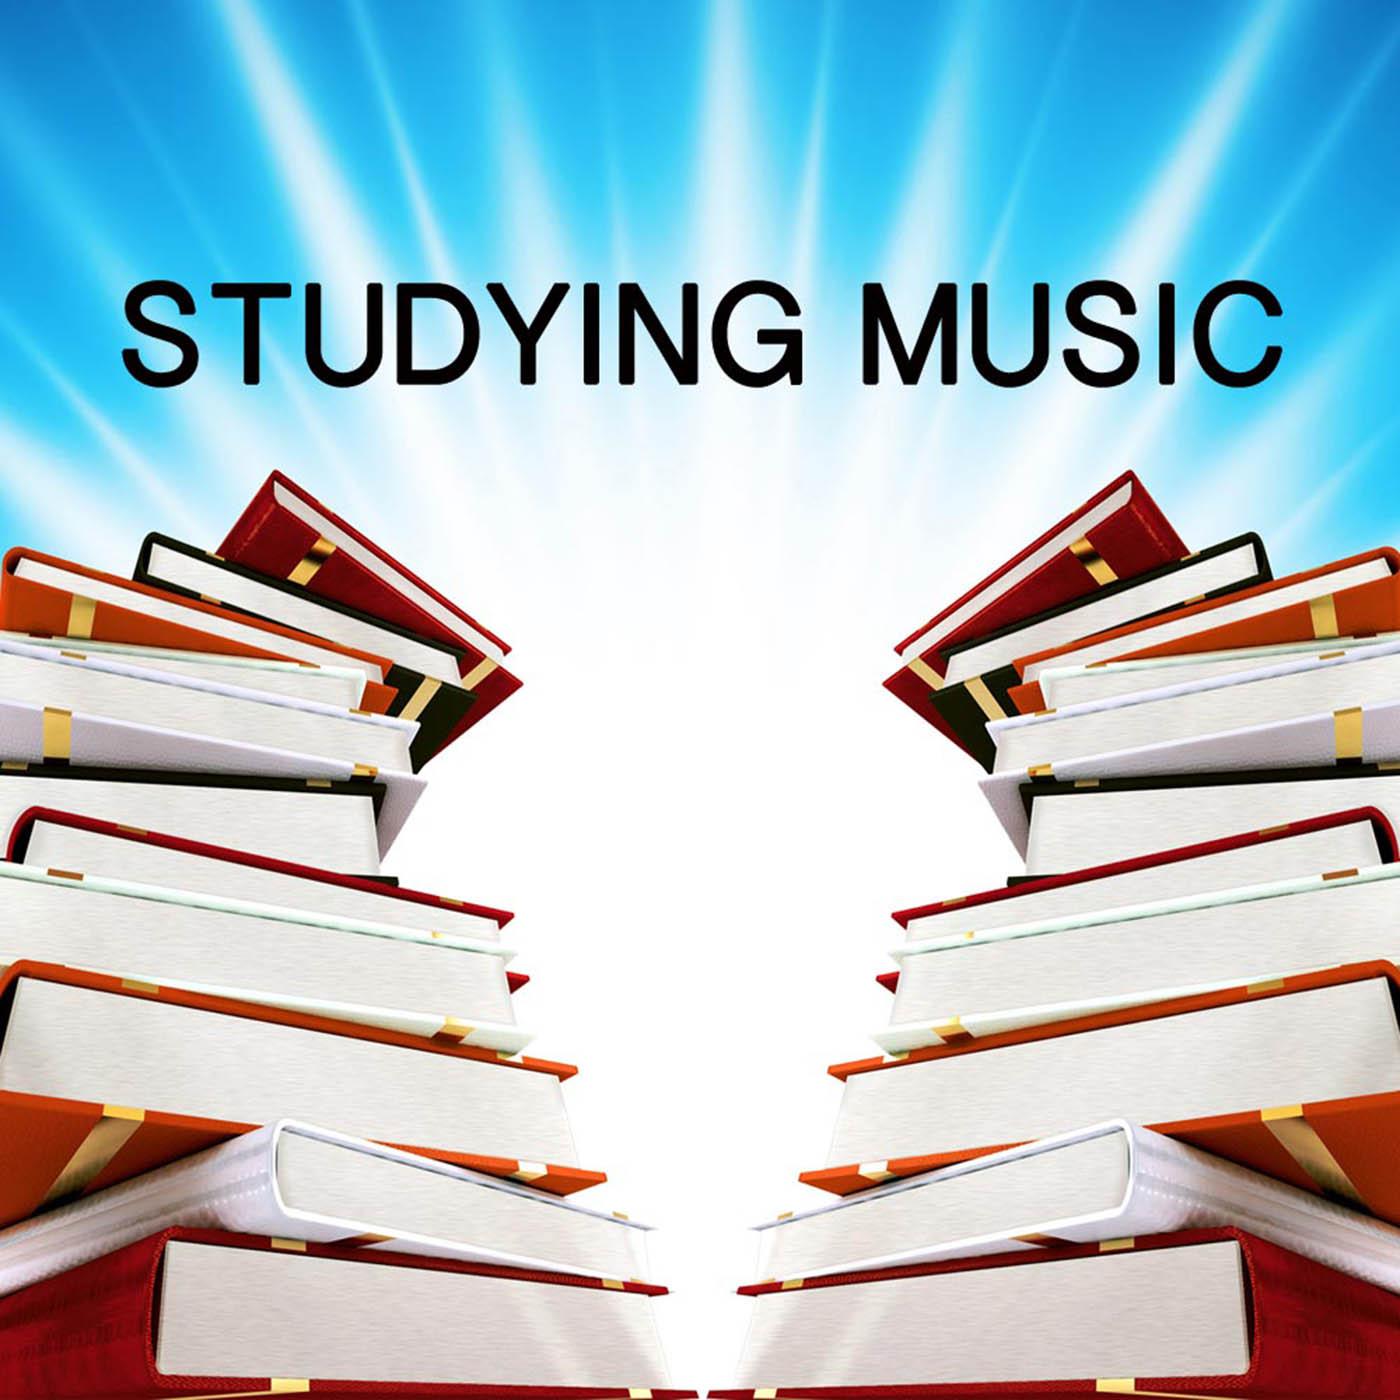 Studying Music - Piano Songs to Increase Brain Power, Study Music Background for Relaxation, Concentration & Focus On Learning and Slow Reading